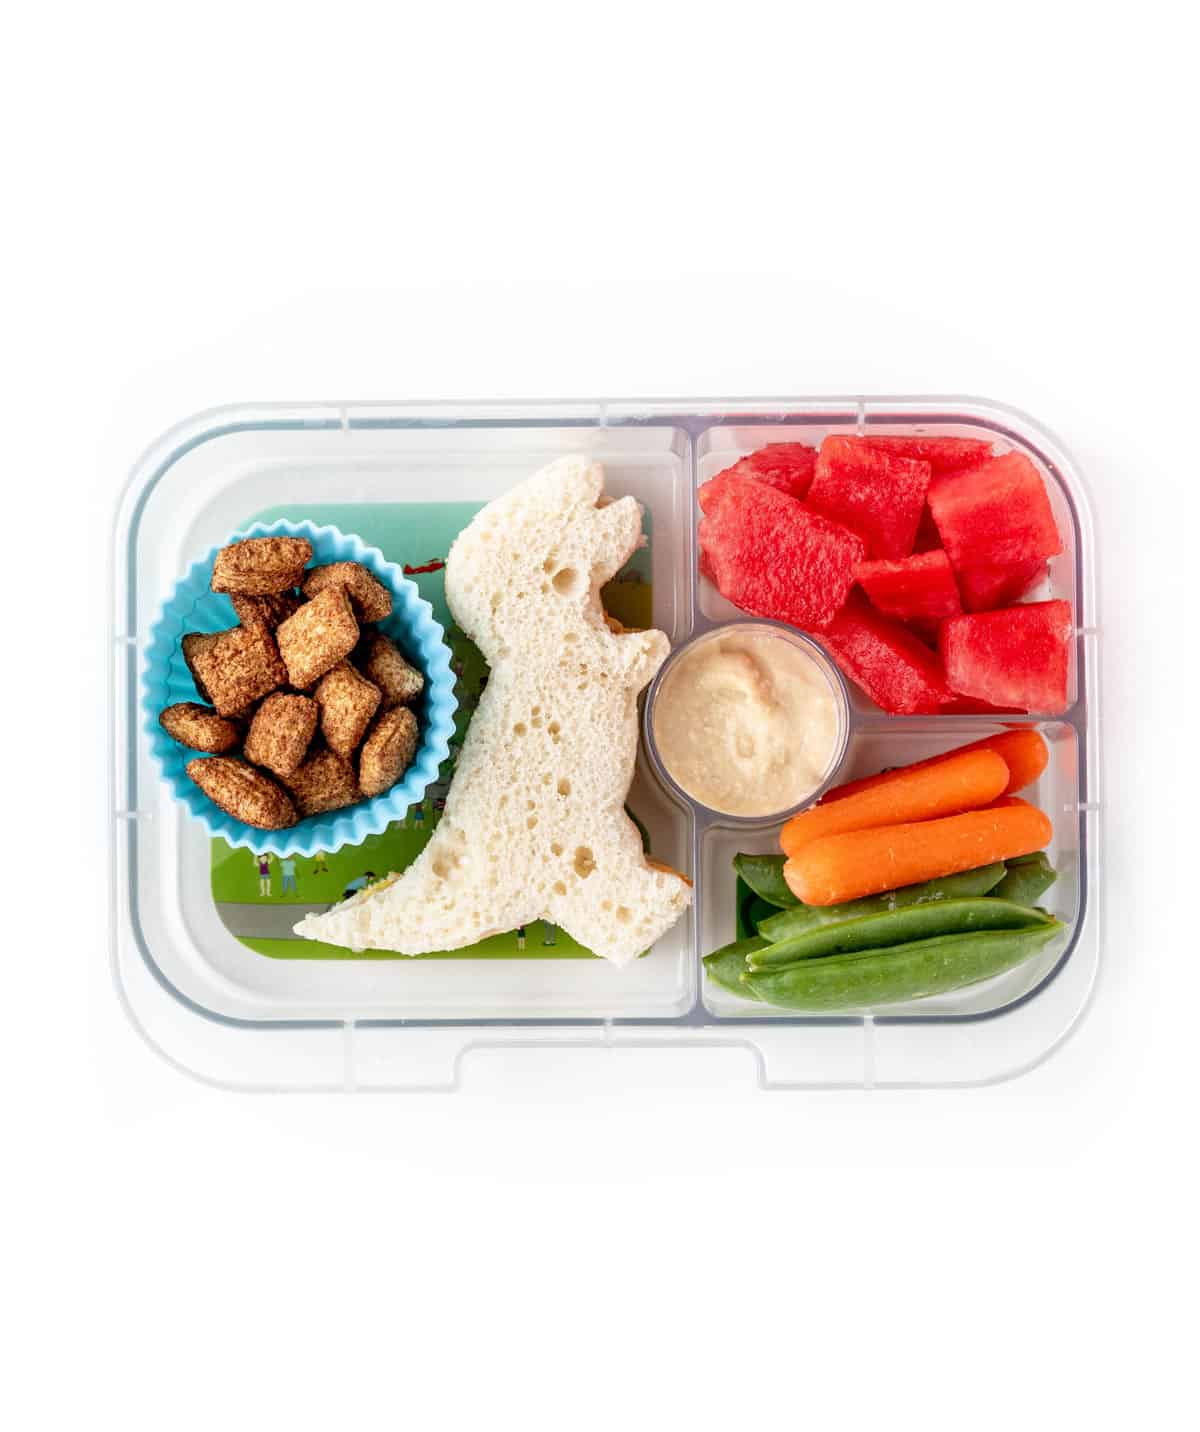 Dinosaur sandwich, whole whole grain cereal, watermelon and veggies in a lunch box.